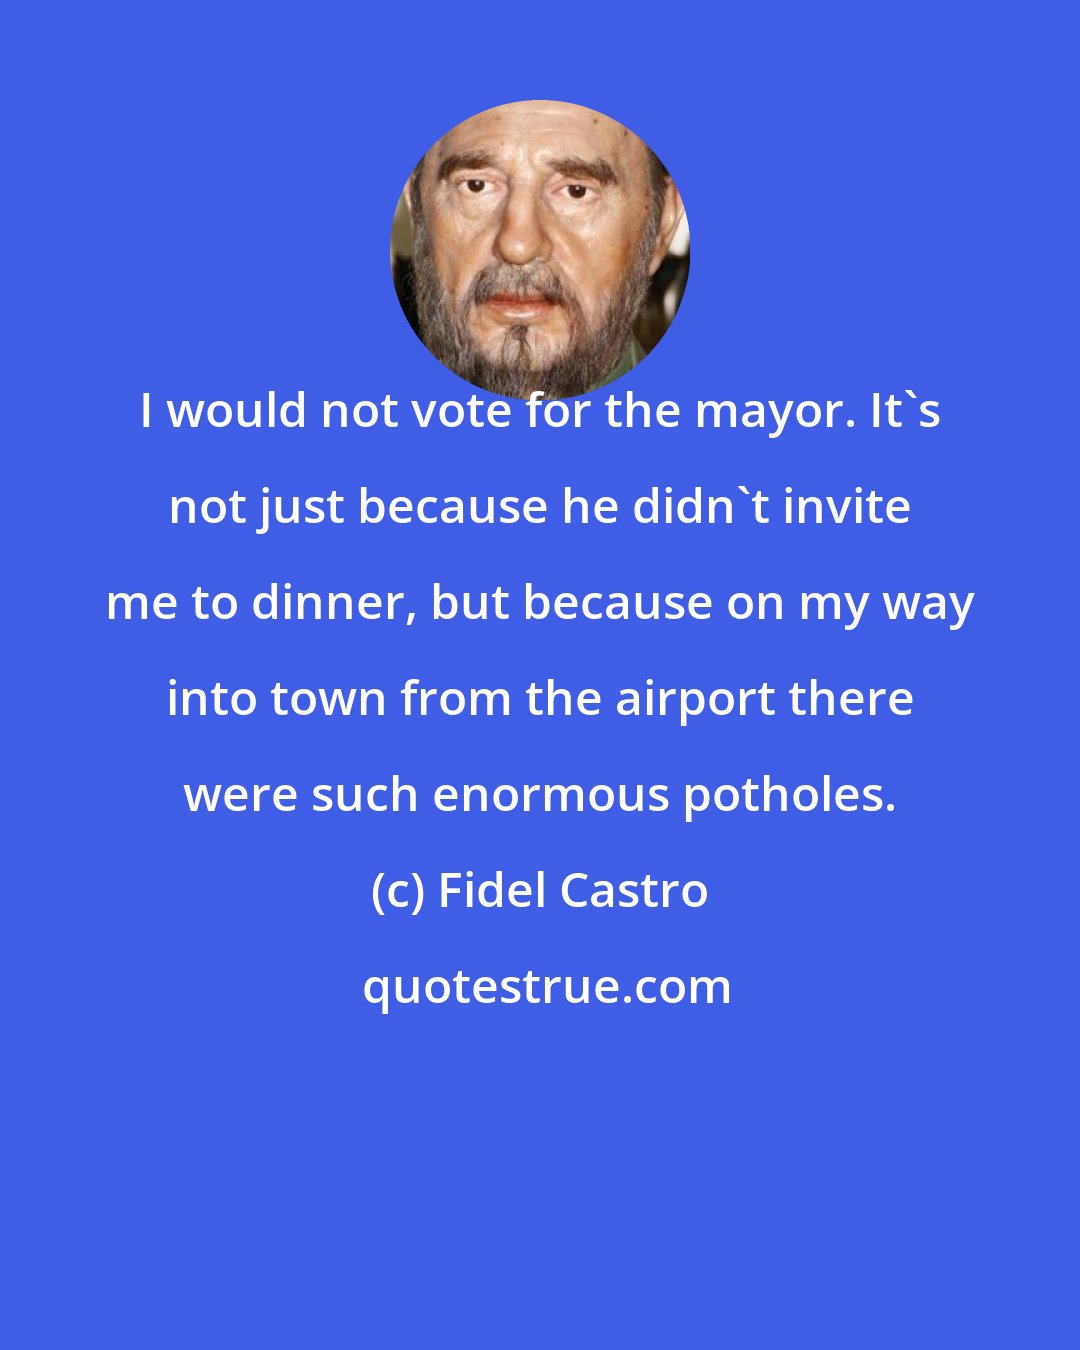 Fidel Castro: I would not vote for the mayor. It's not just because he didn't invite me to dinner, but because on my way into town from the airport there were such enormous potholes.